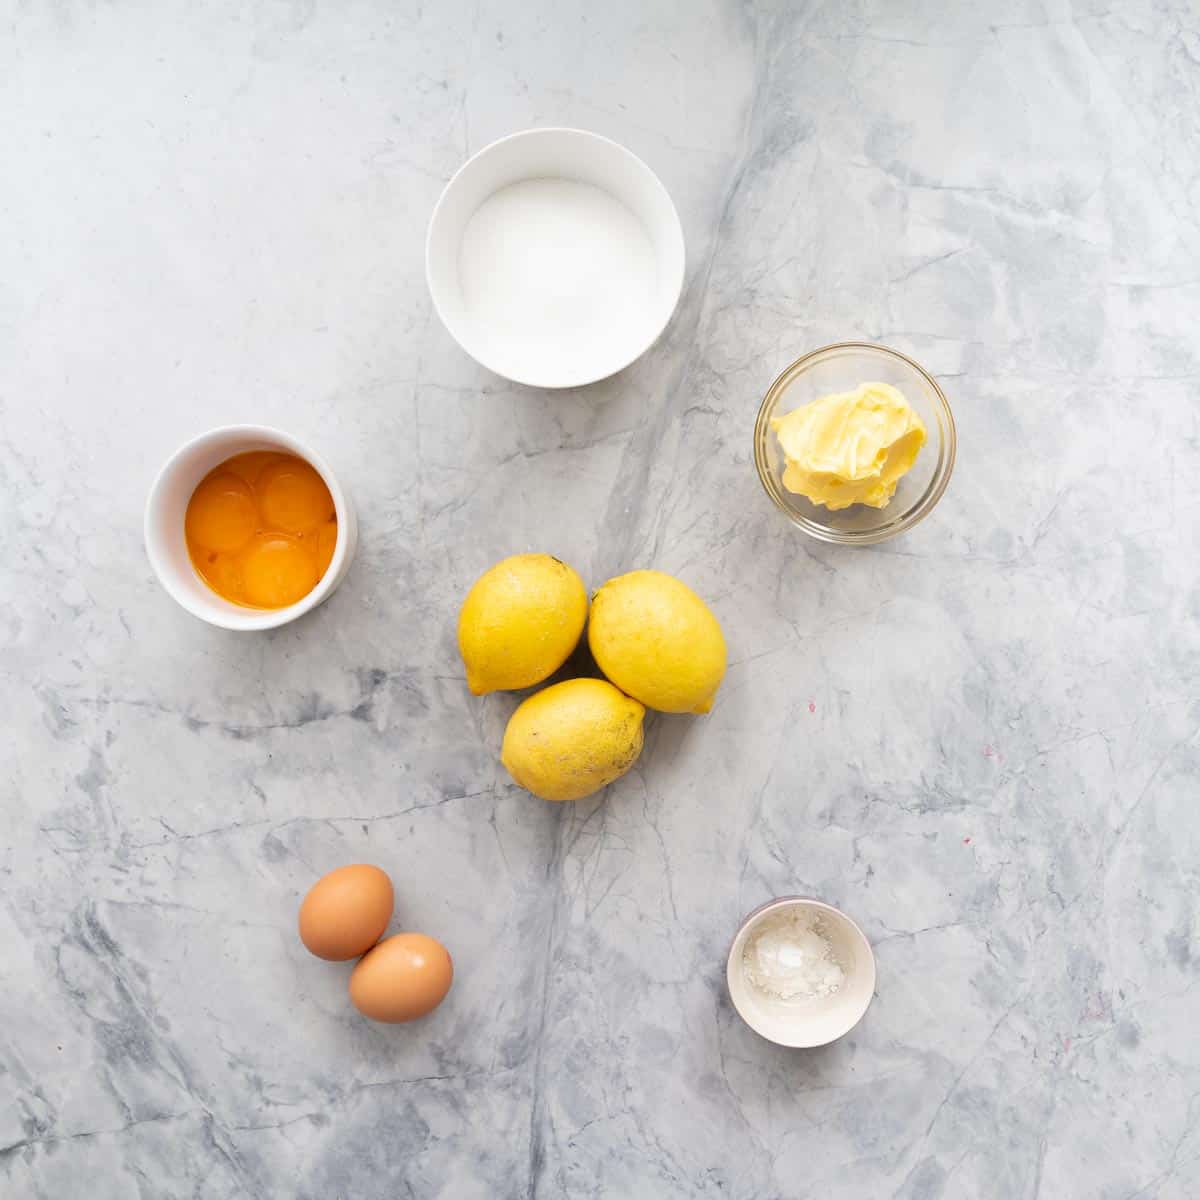 All the ingredients to make the Lemon Butter laid out on the bench 